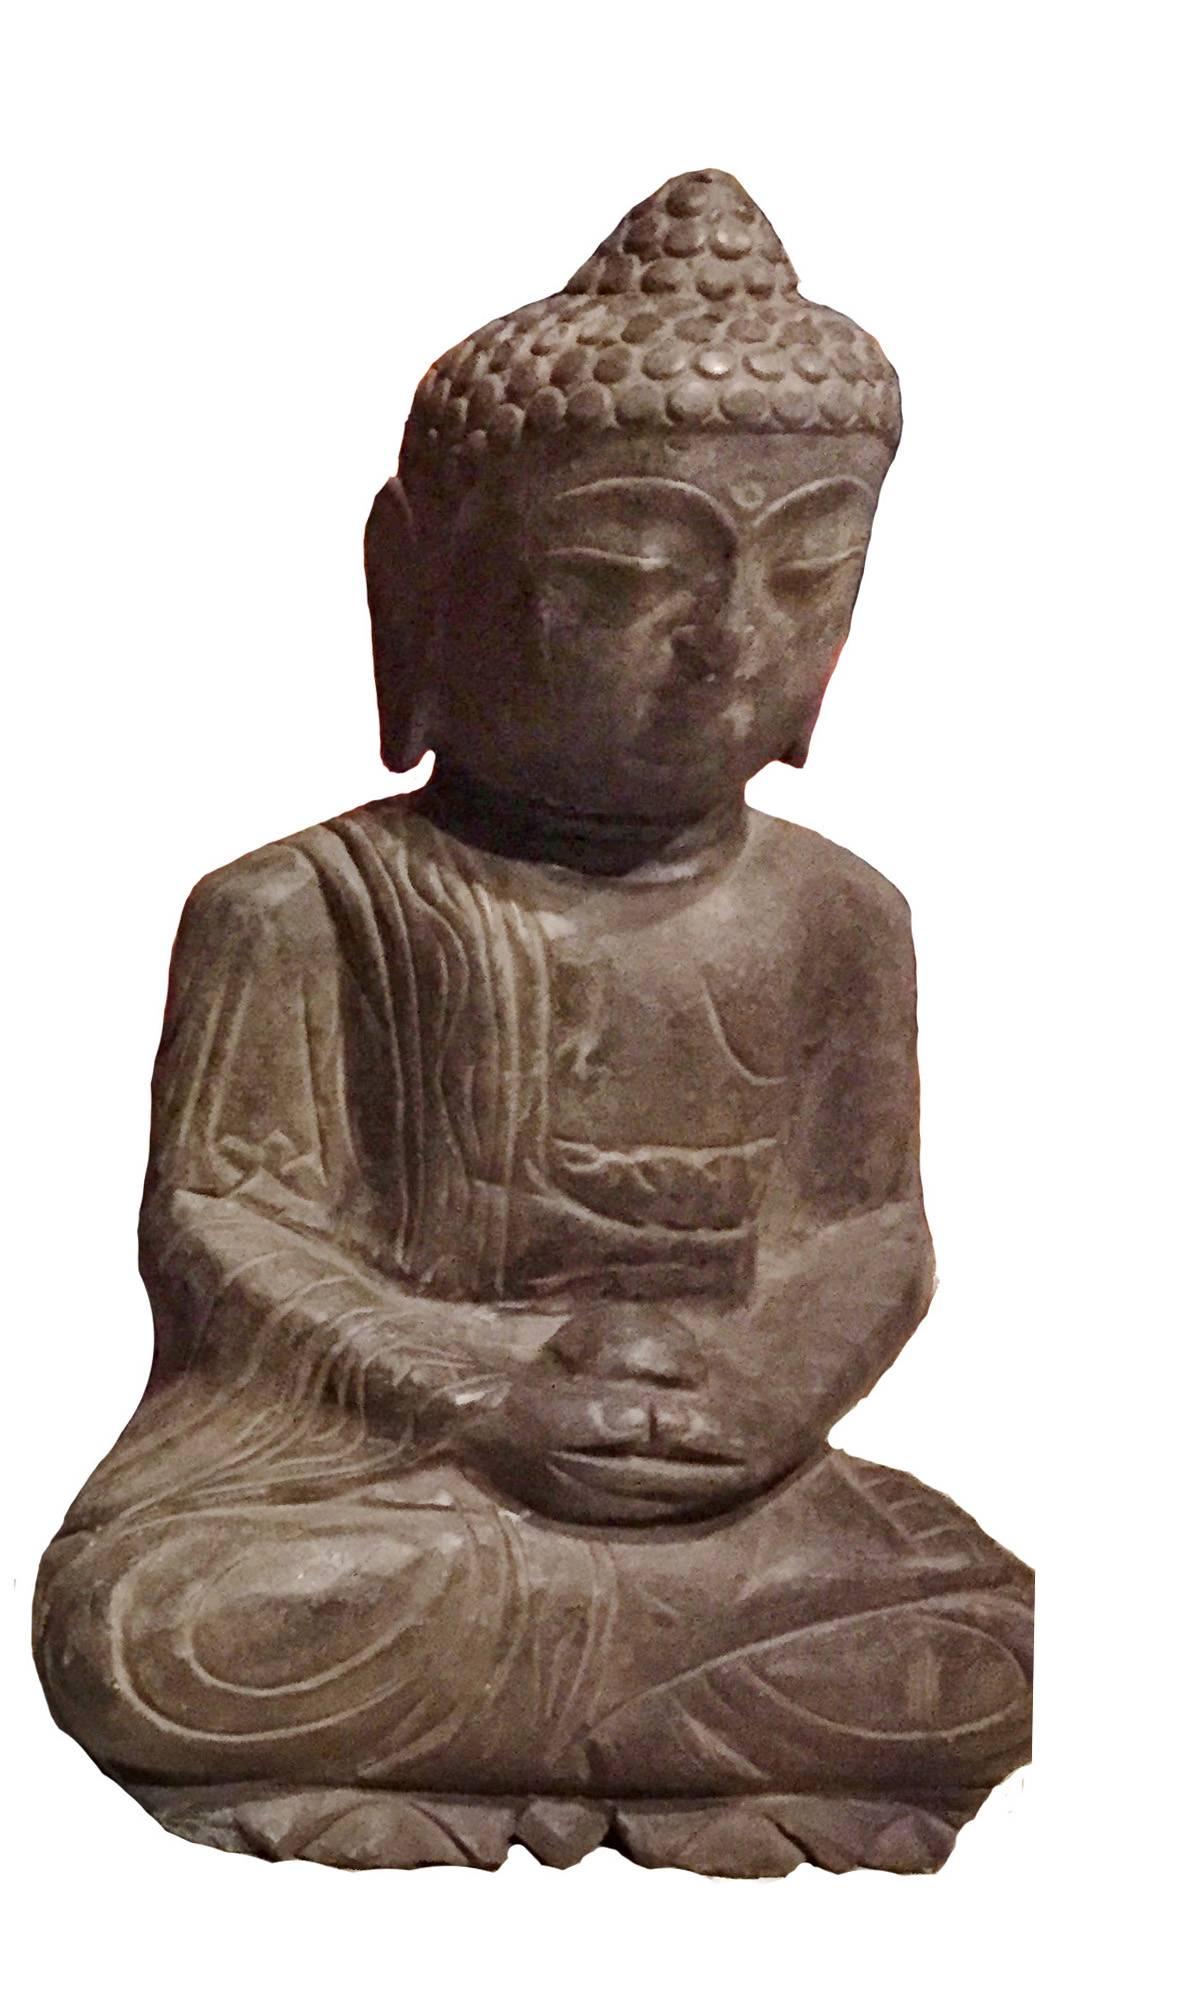 This is a rare set of three stone sculptures depicting Buddha. Each piece displays fine details of head crown, facial features and robe. Peaceful expressions and overall serenity. 

All three Buddhas have straight, upright postures, despite photo